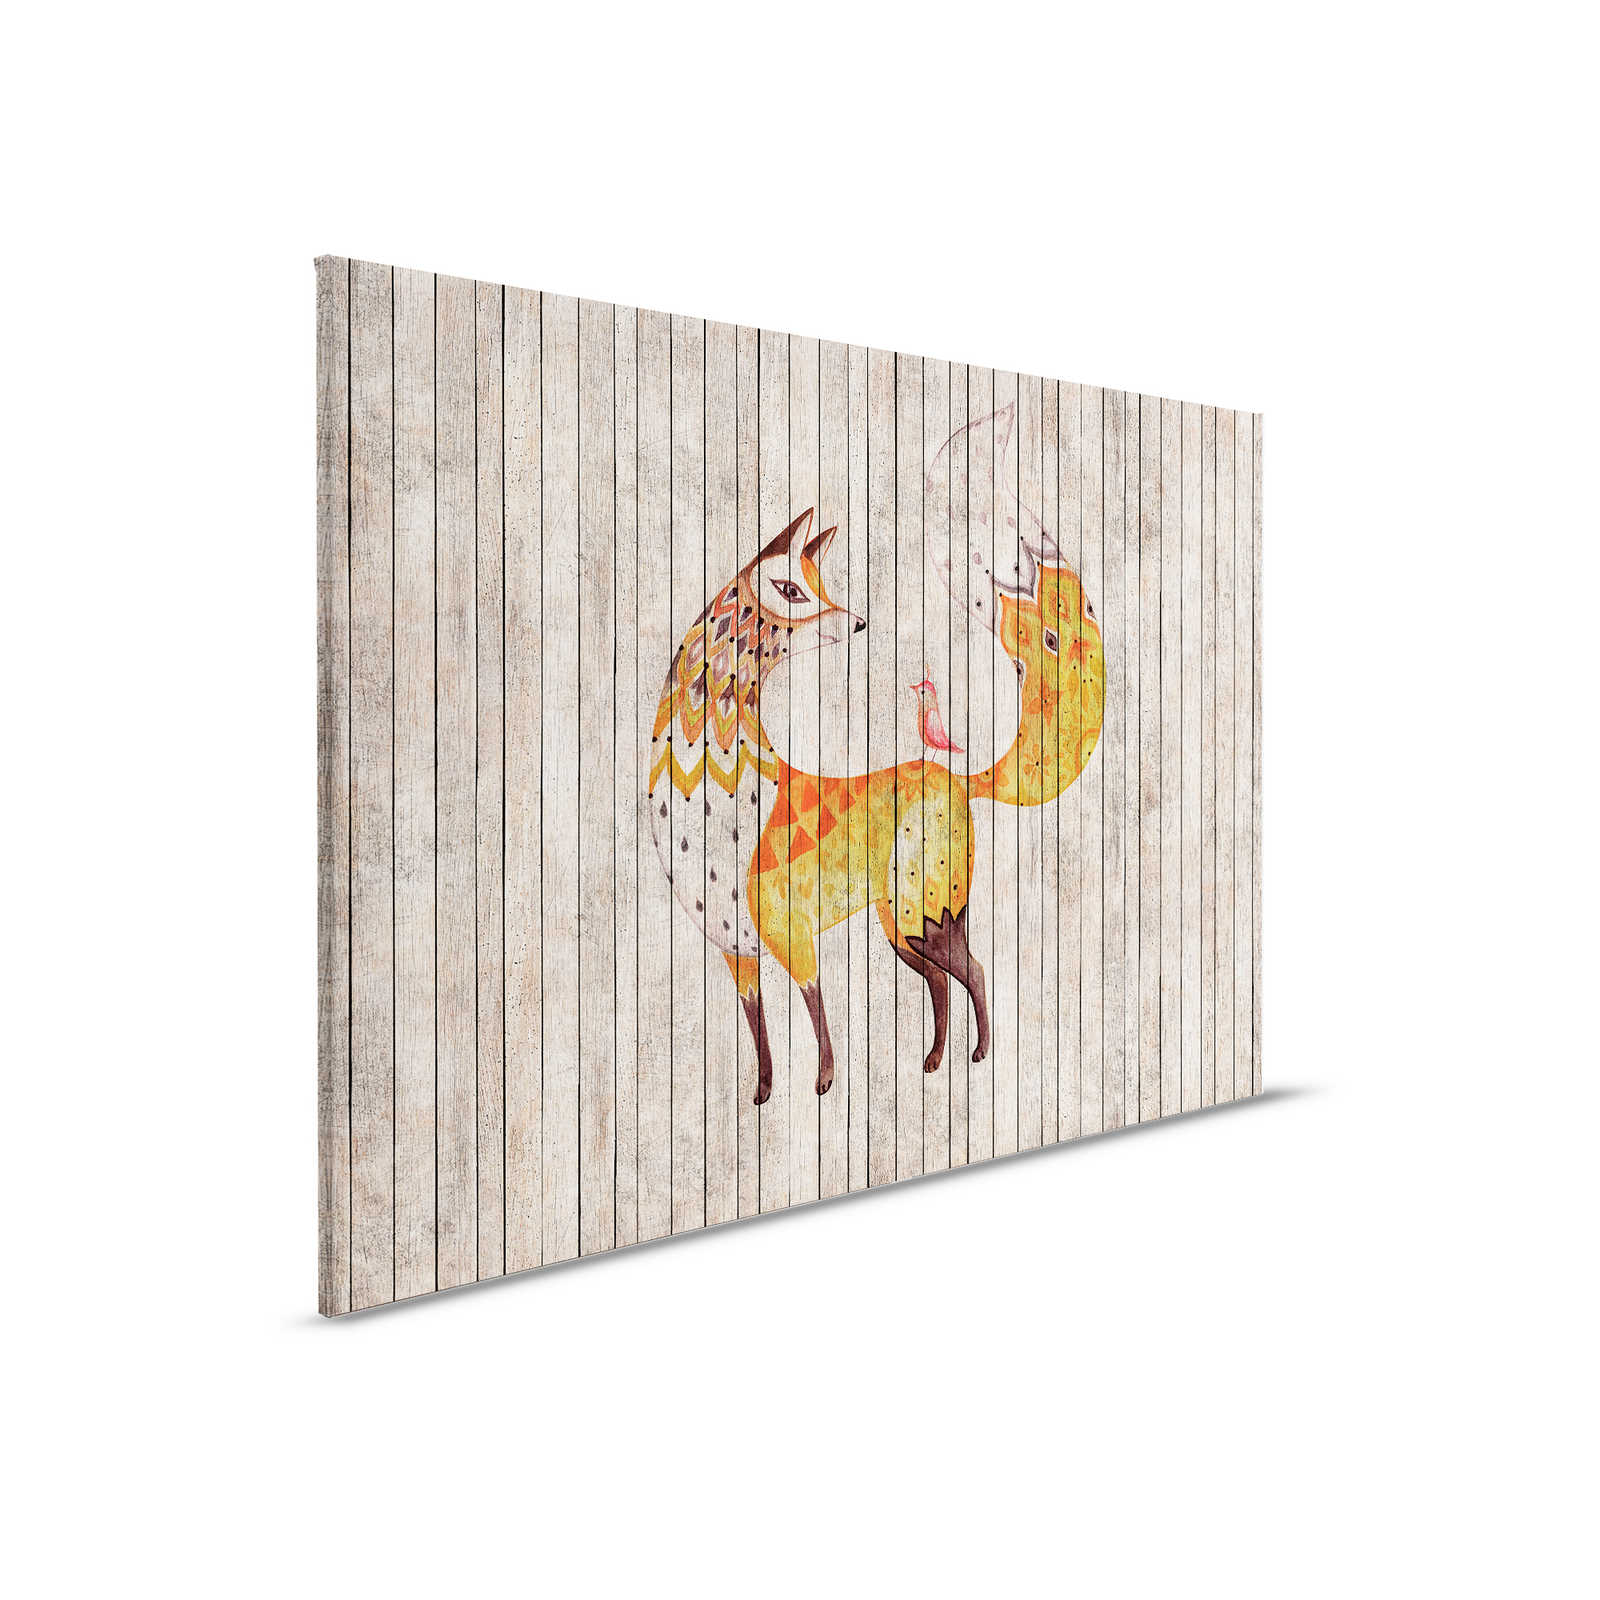 Fairy tale 2 - Fox and bird on wood look canvas picture - 0.90 m x 0.60 m
